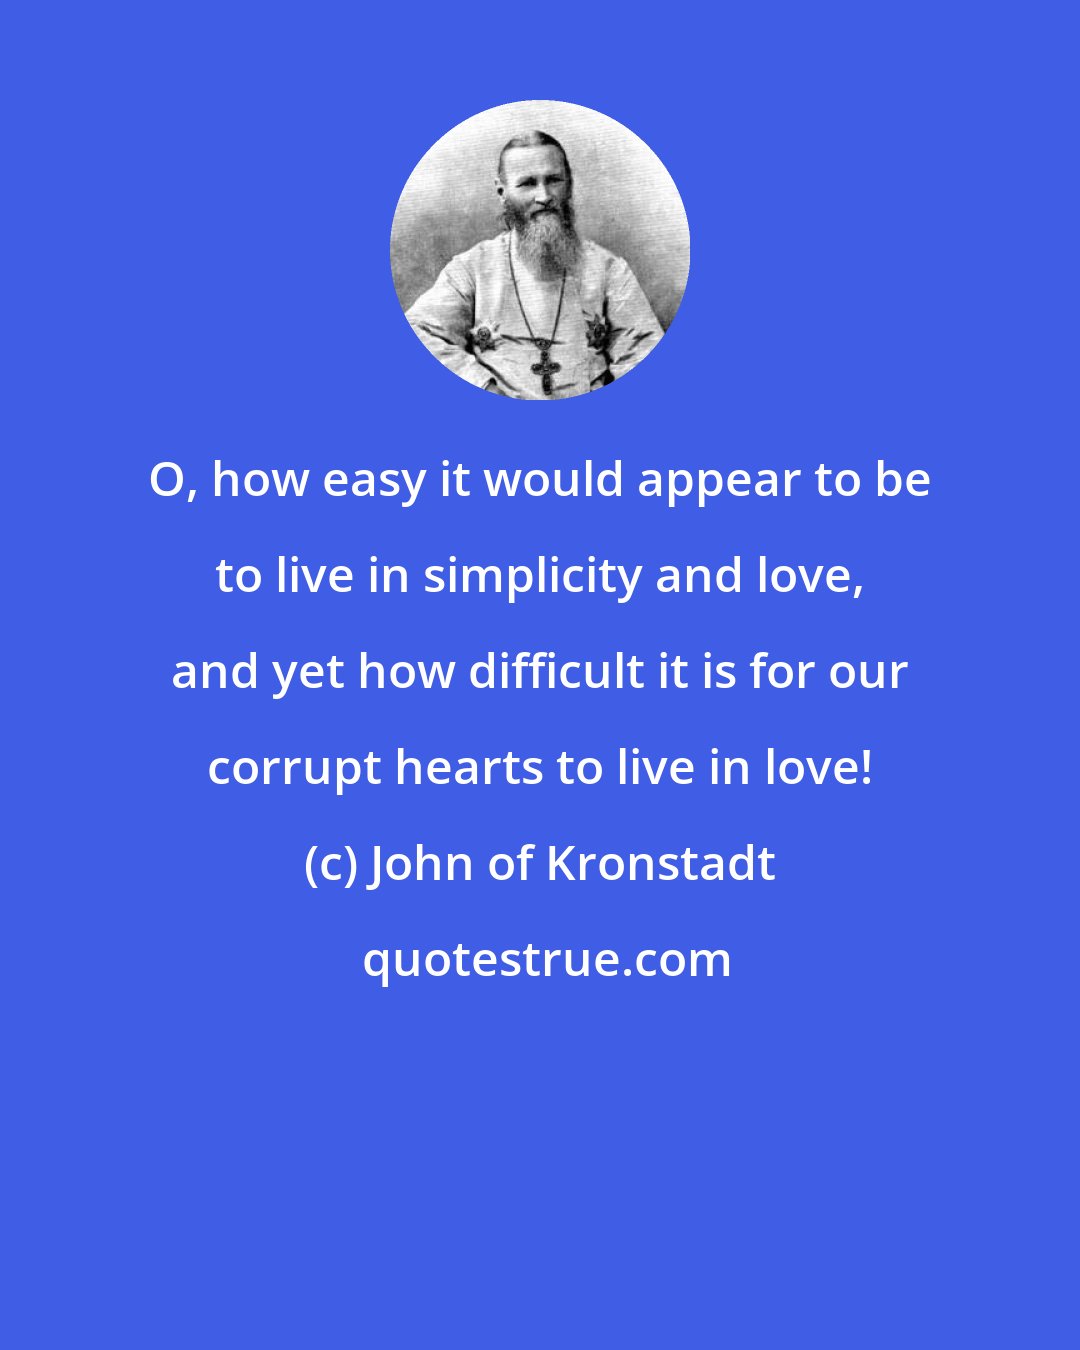 John of Kronstadt: O, how easy it would appear to be to live in simplicity and love, and yet how difficult it is for our corrupt hearts to live in love!